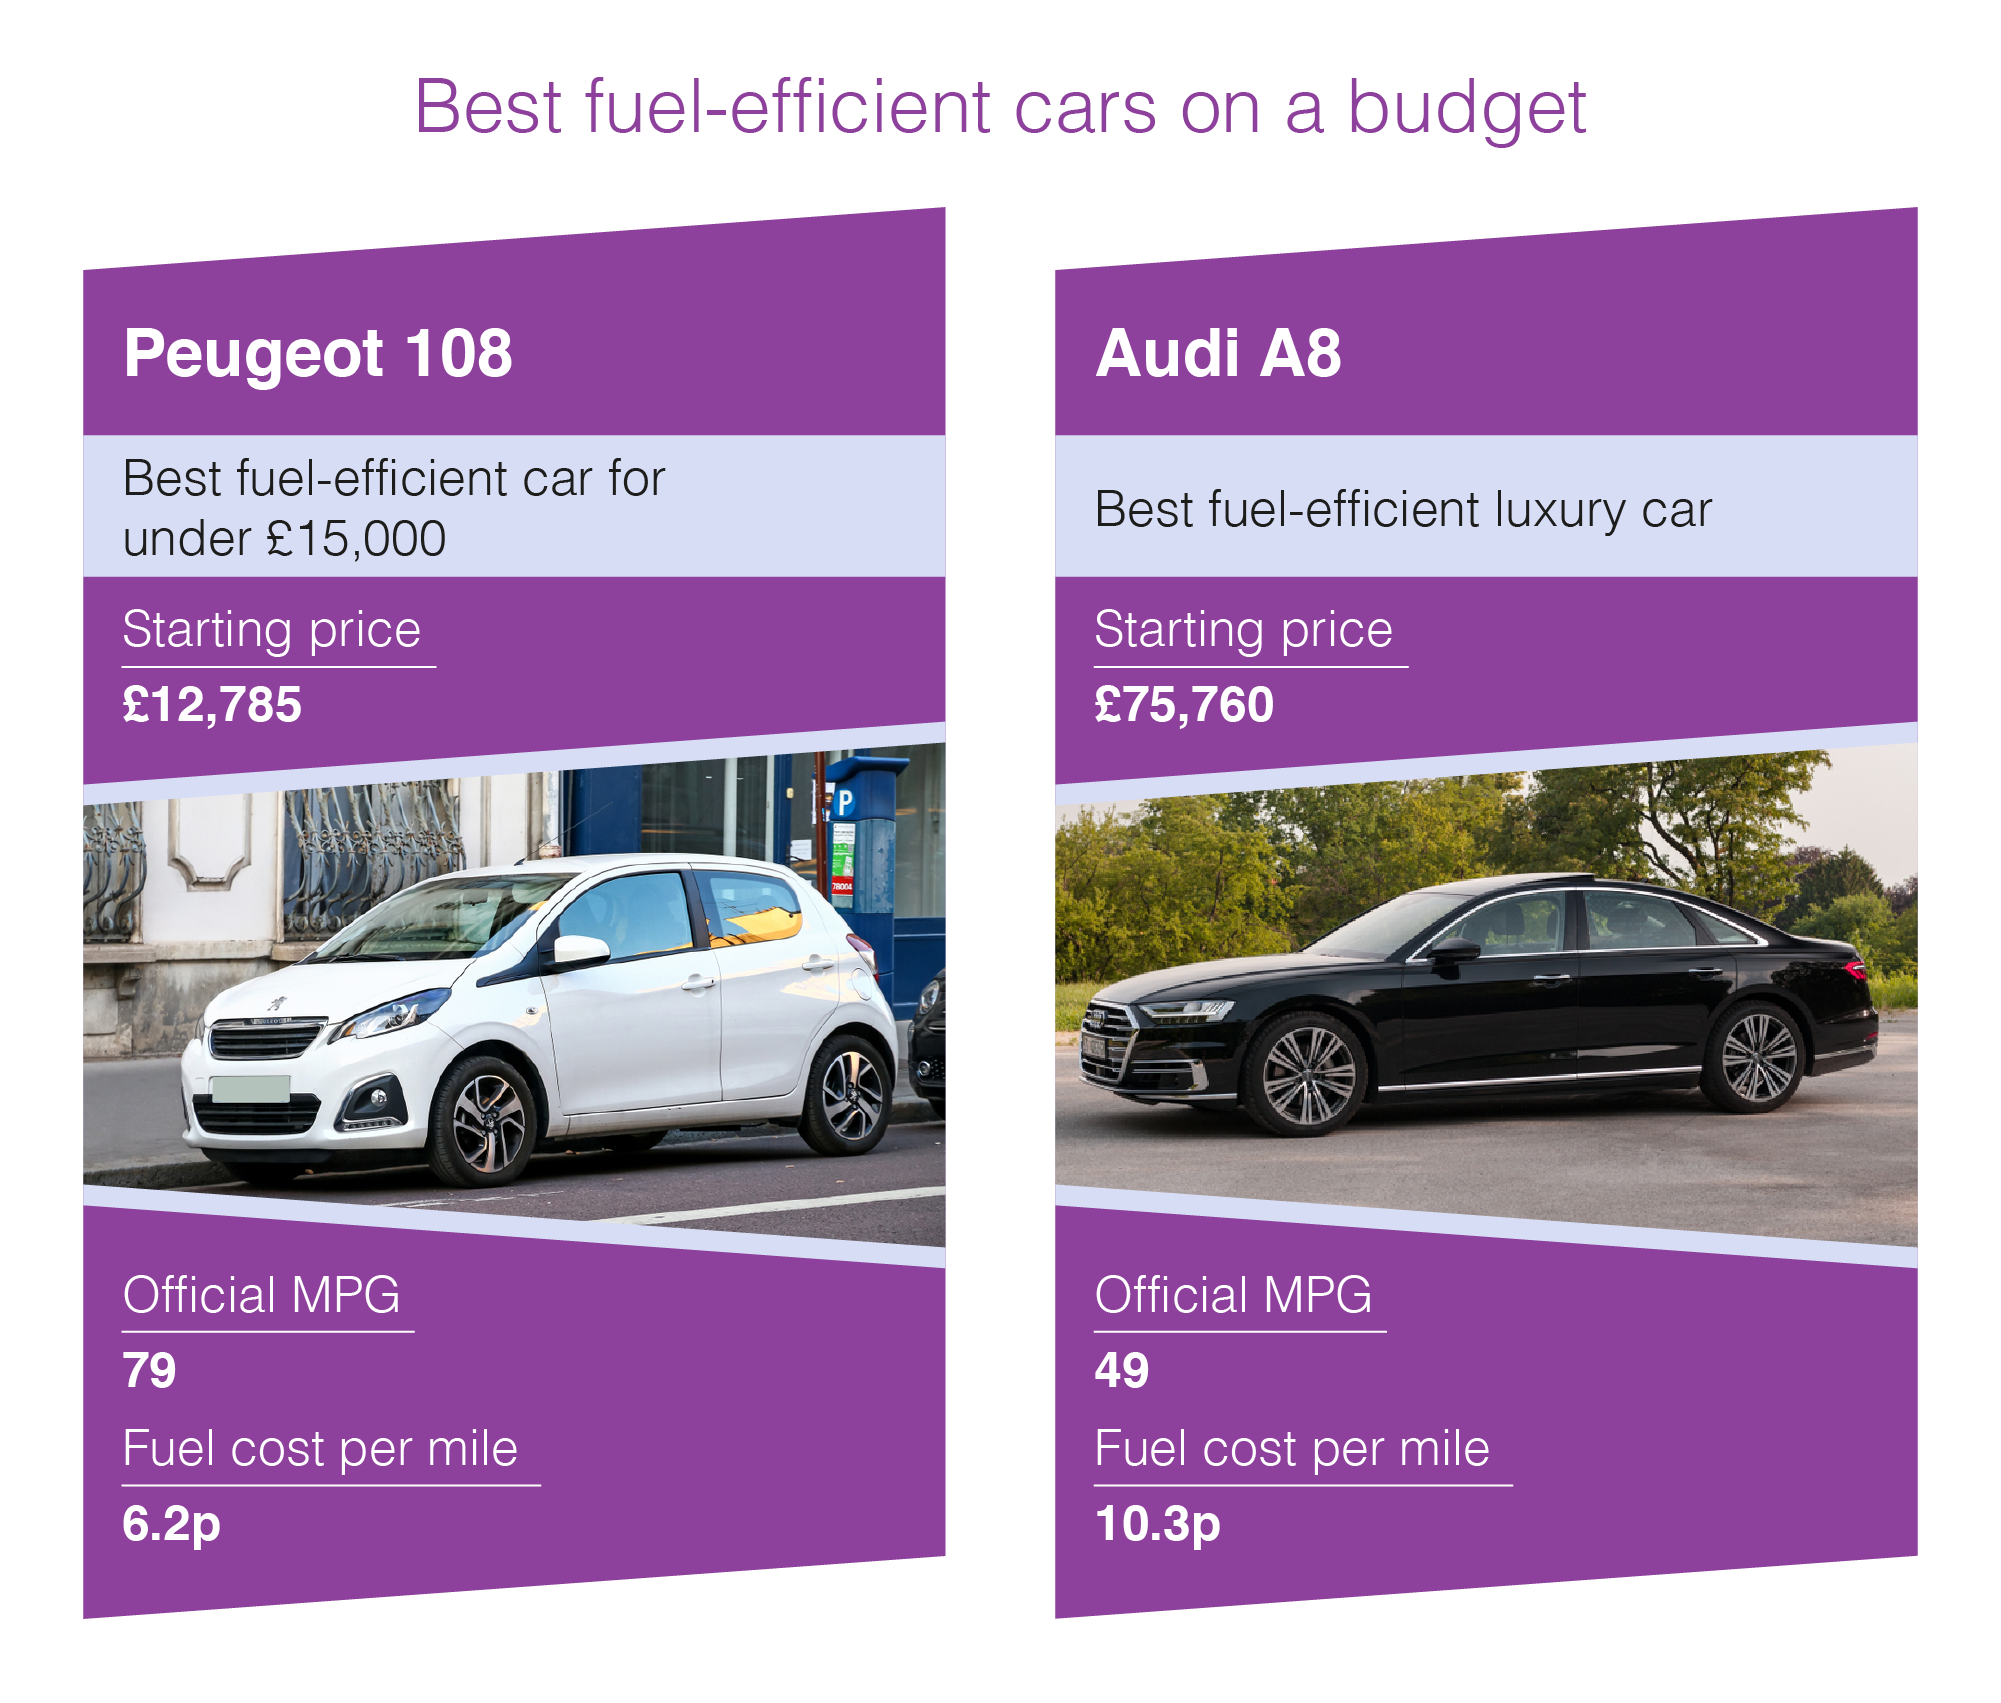 Best fuel-efficient cars on a budget graphic